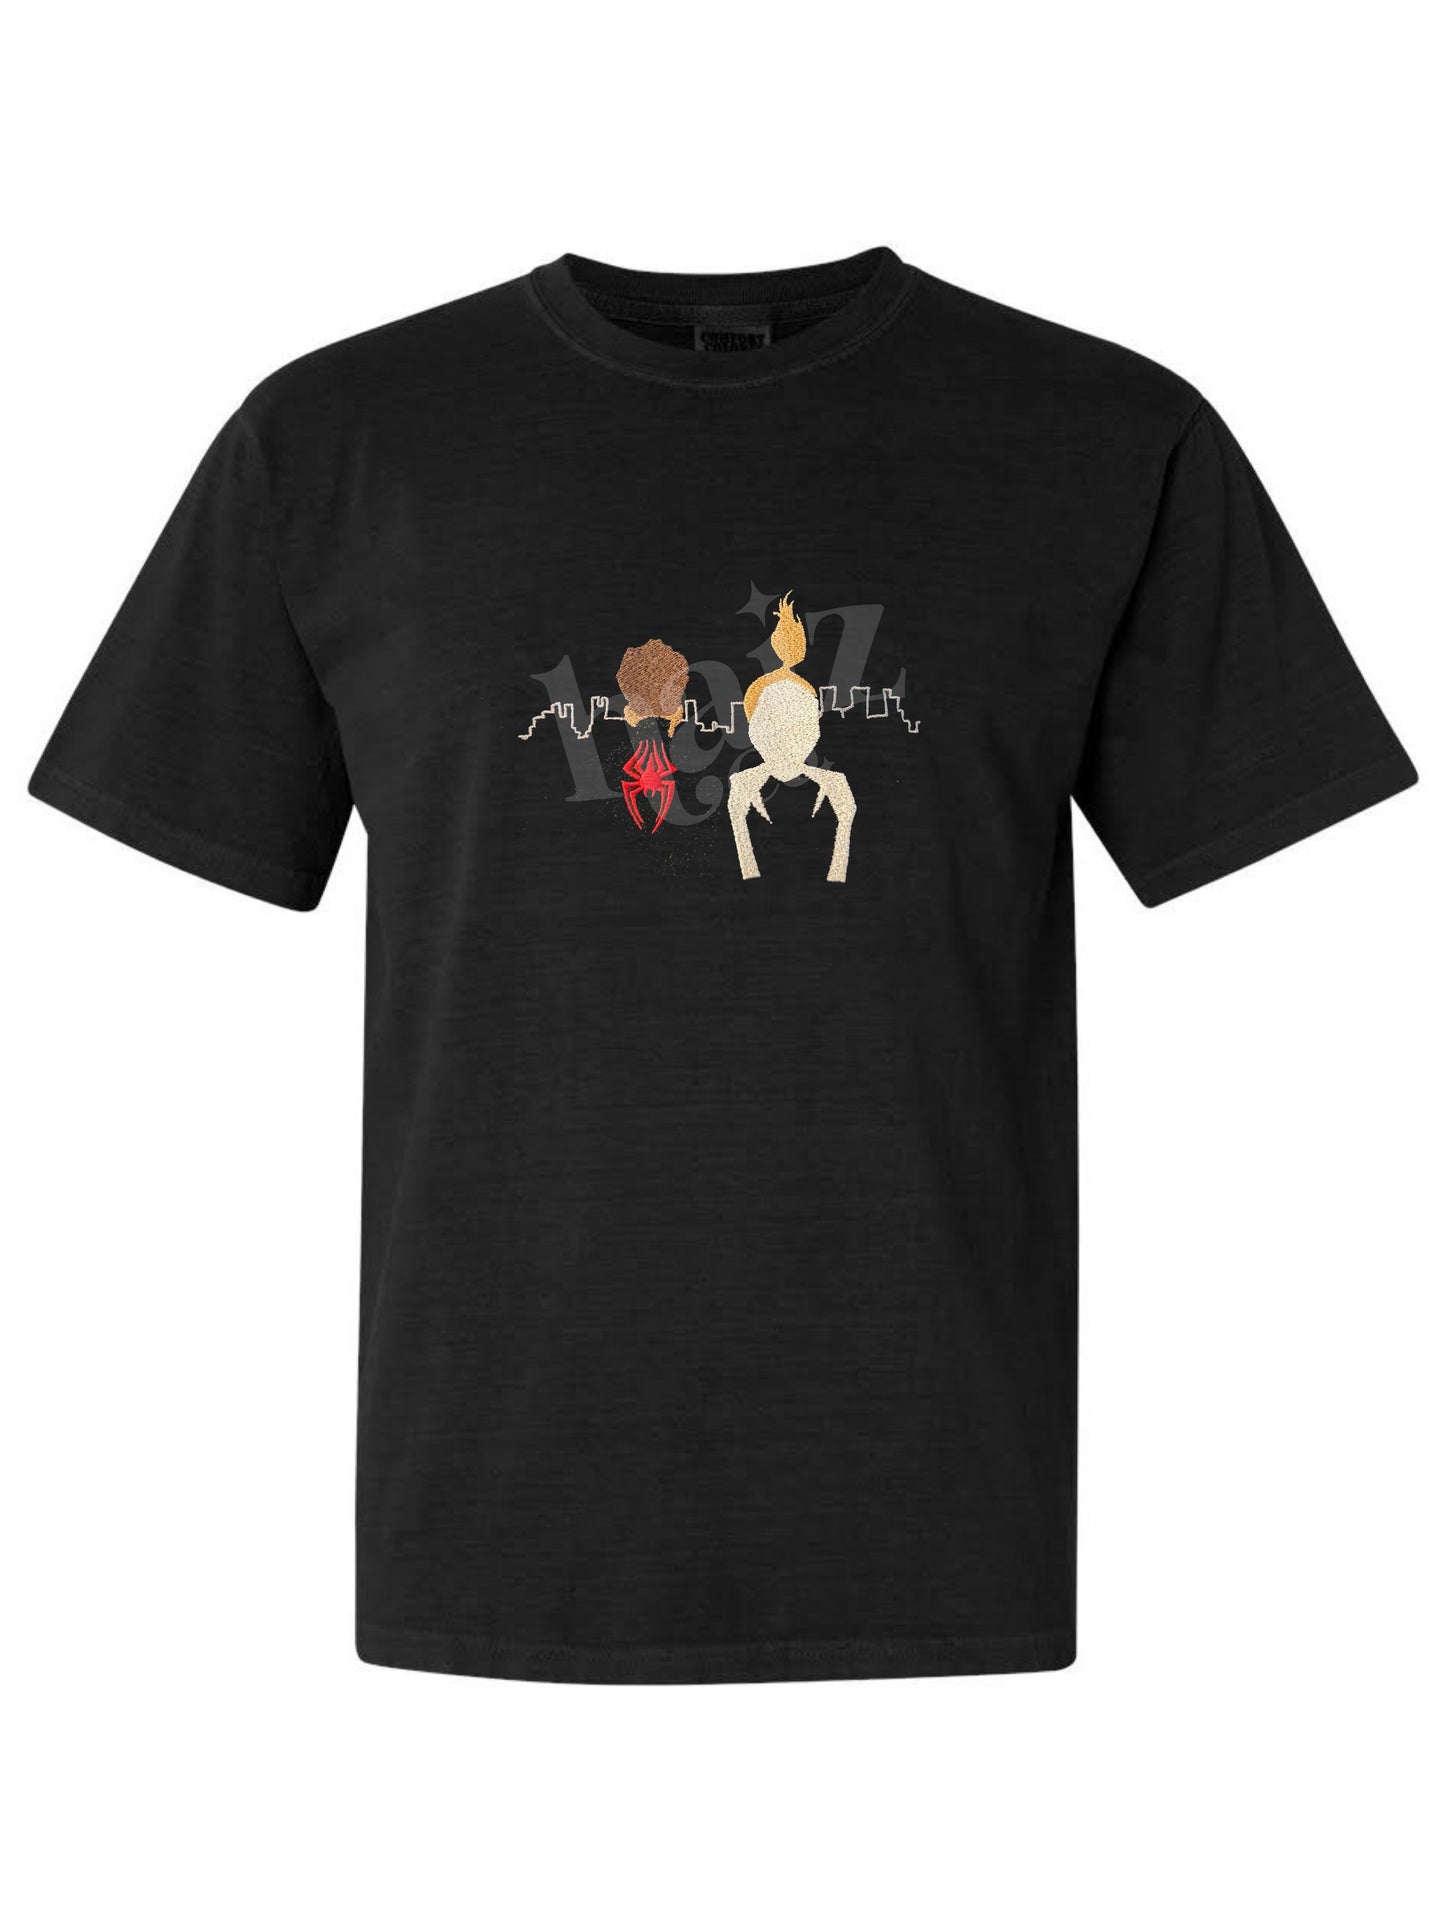 Miles and Gwen embroidered T-SHIRT